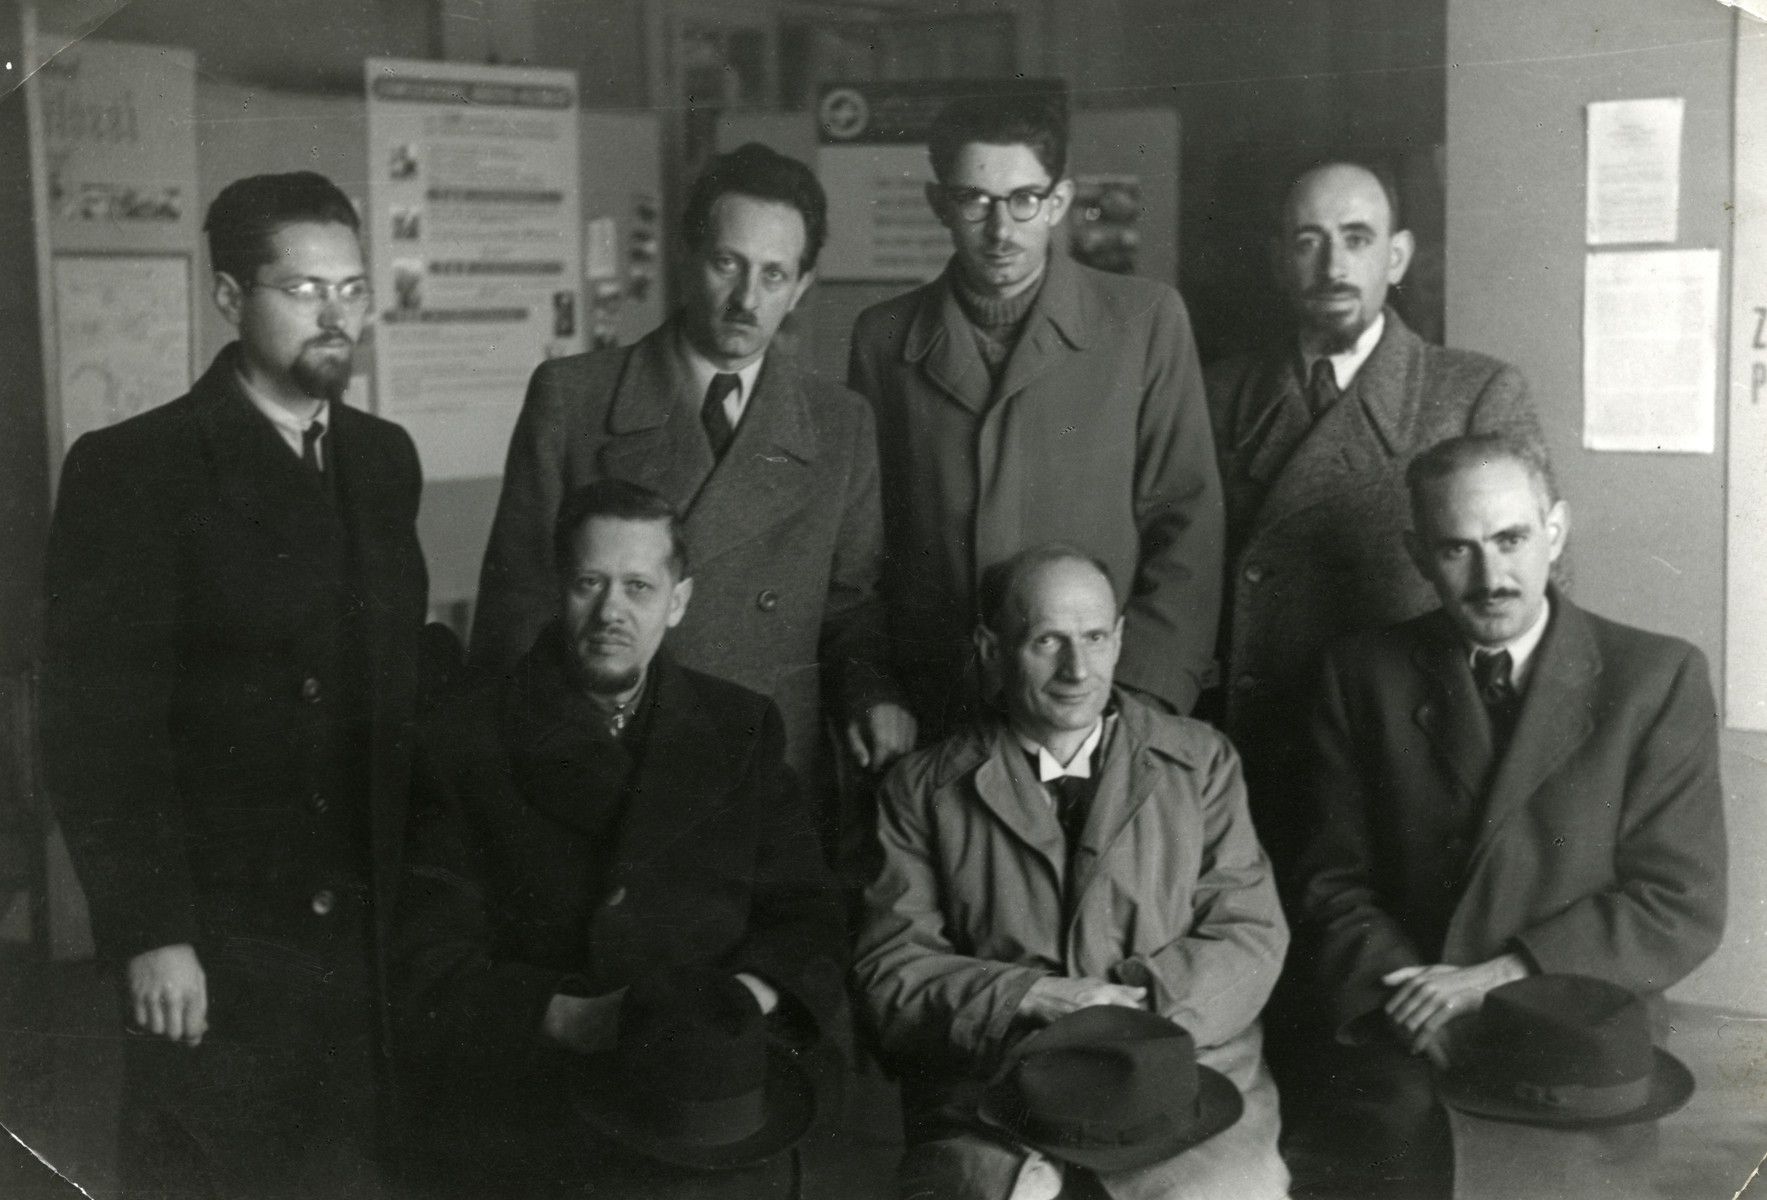 Group portrait of Neolog Rabbis who came to Switzerland on the Kasztner transport to help other Jews to escape.

Pictured are: Top row left to right,  Dr. [Josef] Schindler (Ketchekenet),  Dr. [Adolf] Silberstein (Varschey), Dr. [Odon] Szabo and Dr. Weisz.  Bottom row: Dr. Jeno Frenkel (Szeged), Dr. Protestzult and Dr. [Farkas] Engel (Cegled).